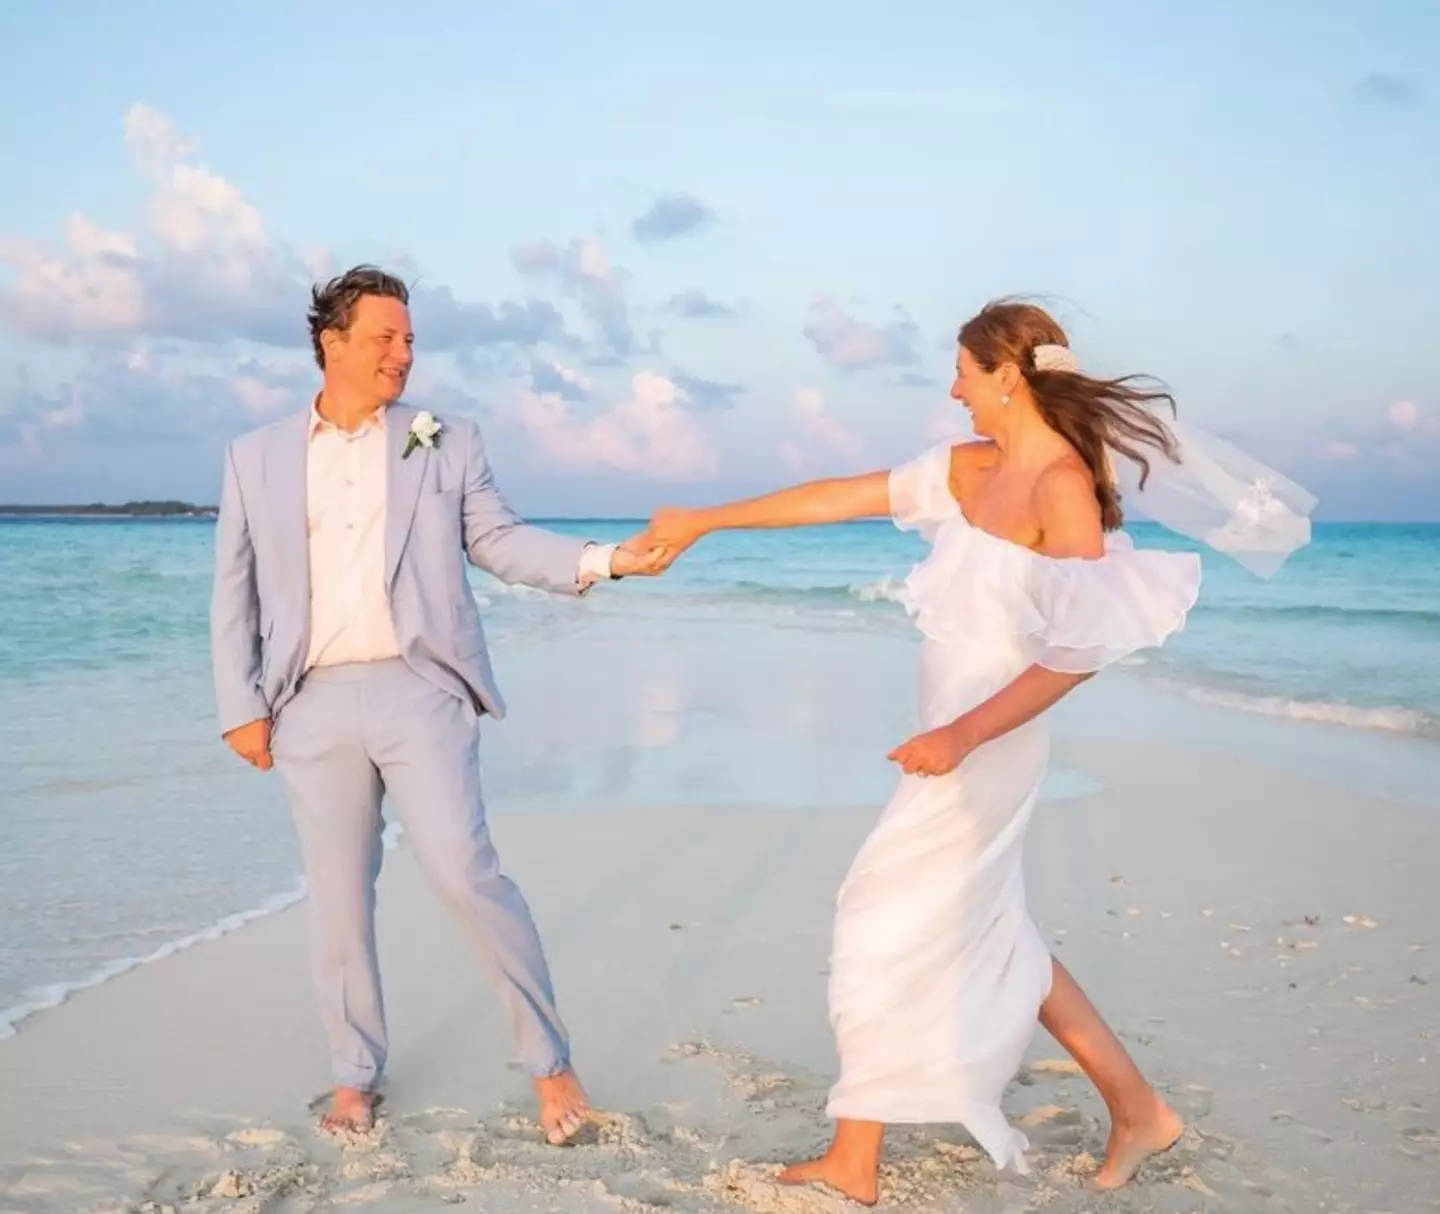 The couple tied the knot again in the Maldives.